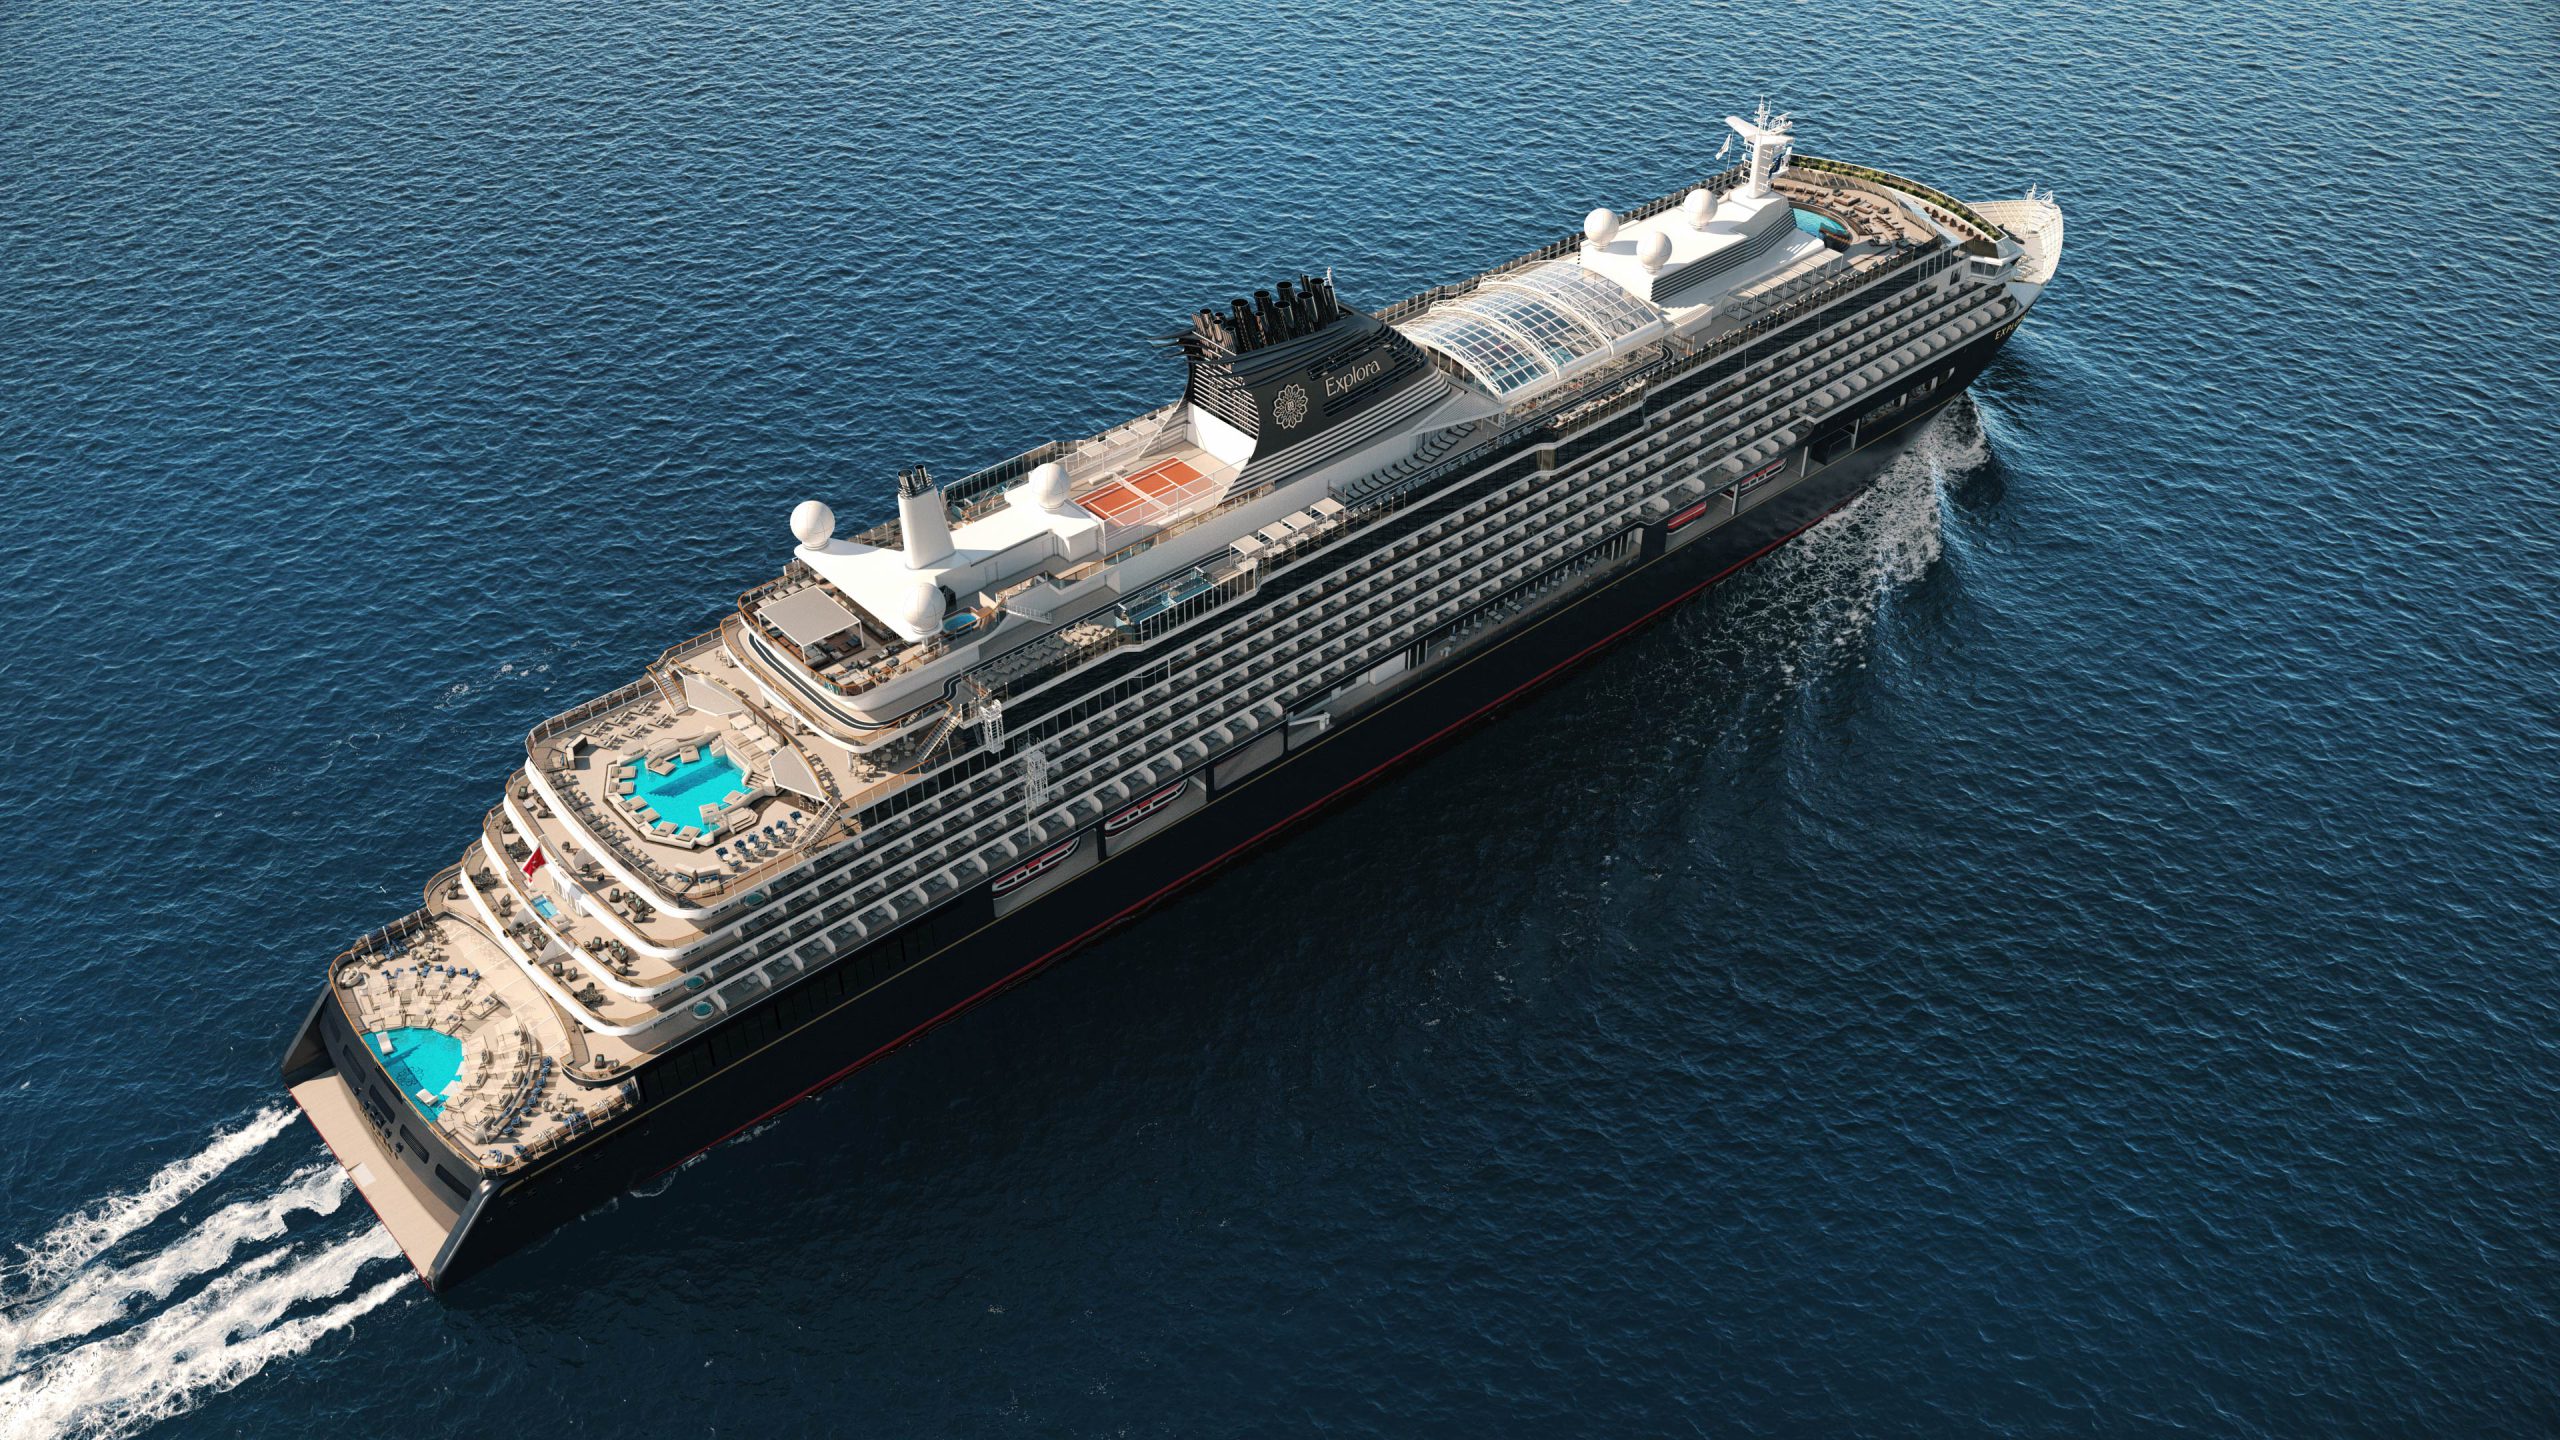 Sail in style with MSC's new luxury brand Explora Journeys in 2023